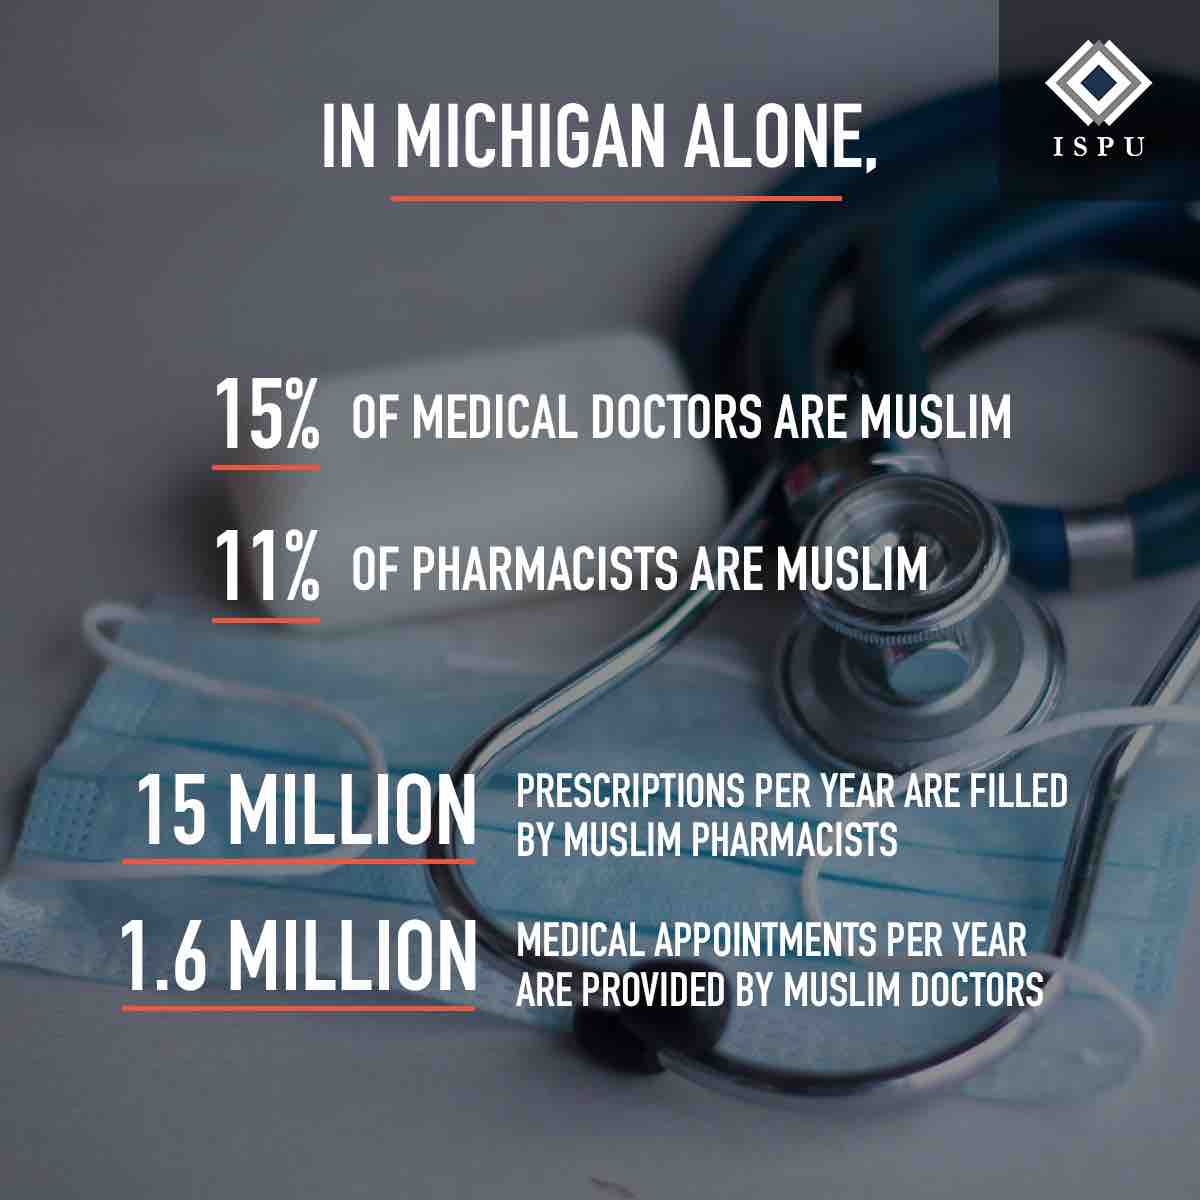 In Michigan alone, 15% of medical doctors are Muslim, 11% of pharmacists are Muslim, 15 million prescriptions per year are filled by Muslim pharmacists, and 1.6 million medical appointments per year are provided by Muslim doctors.